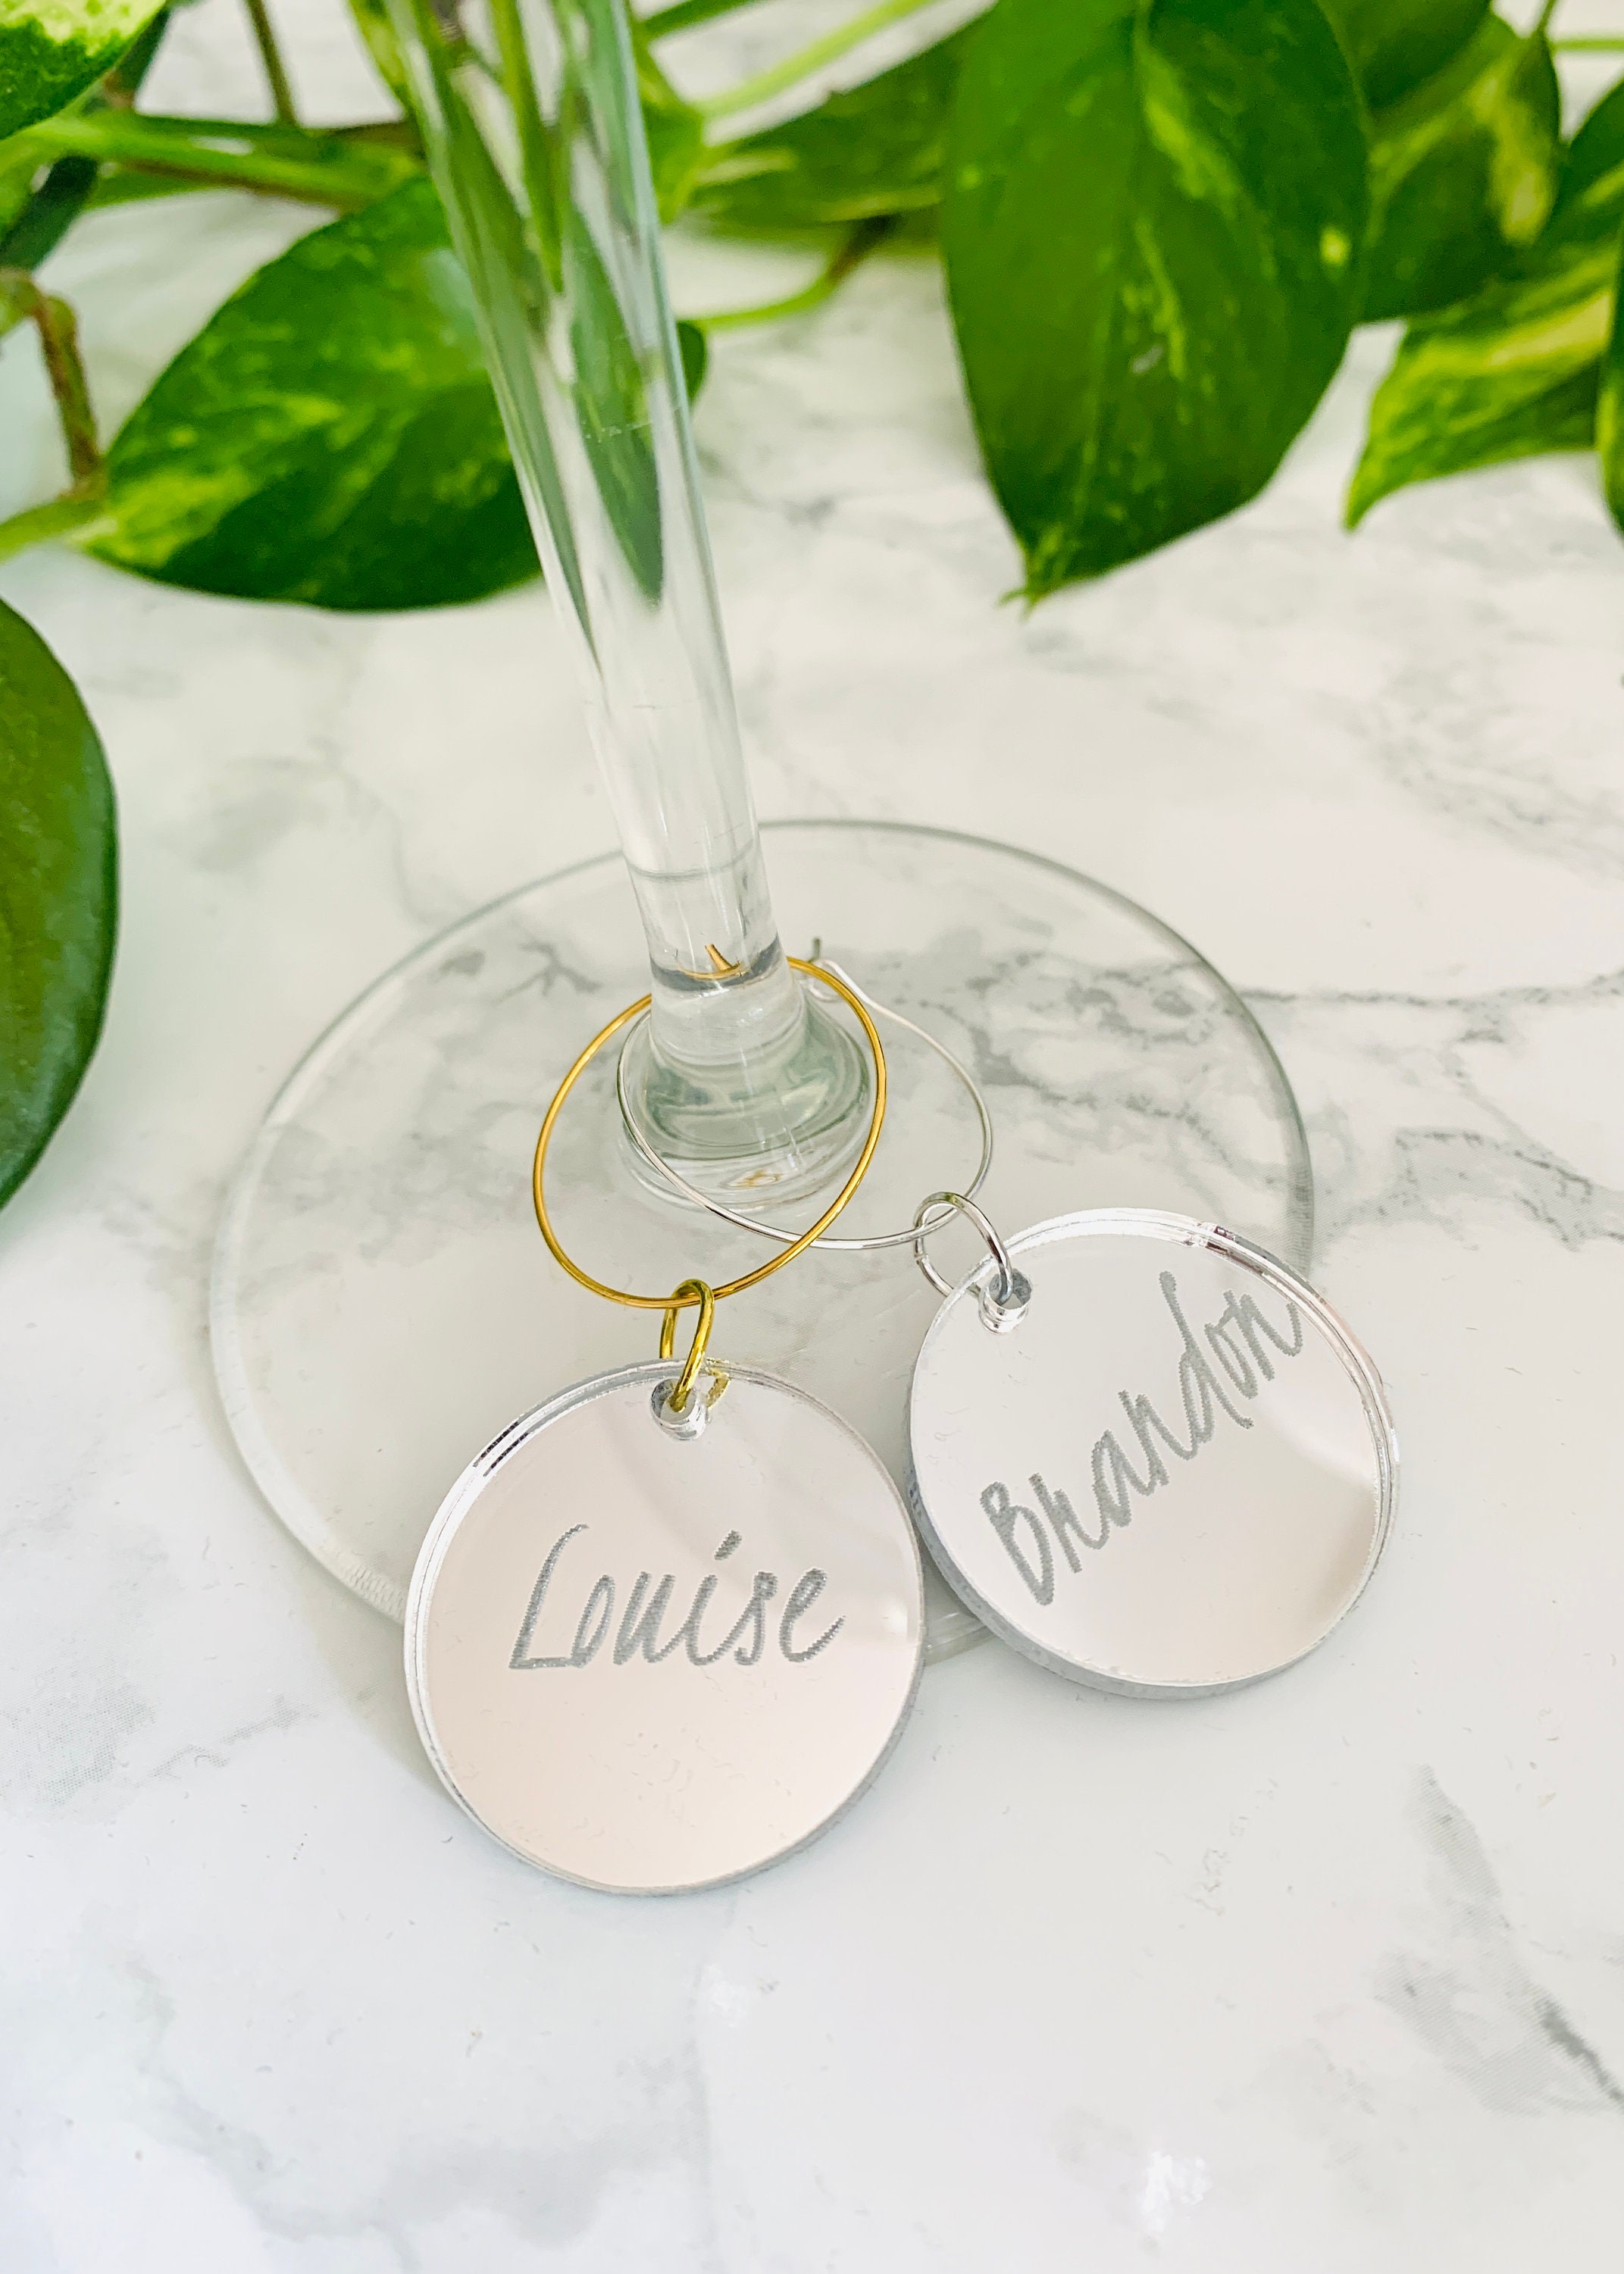 Personalized Wine Glass Charms - My Turn for Us